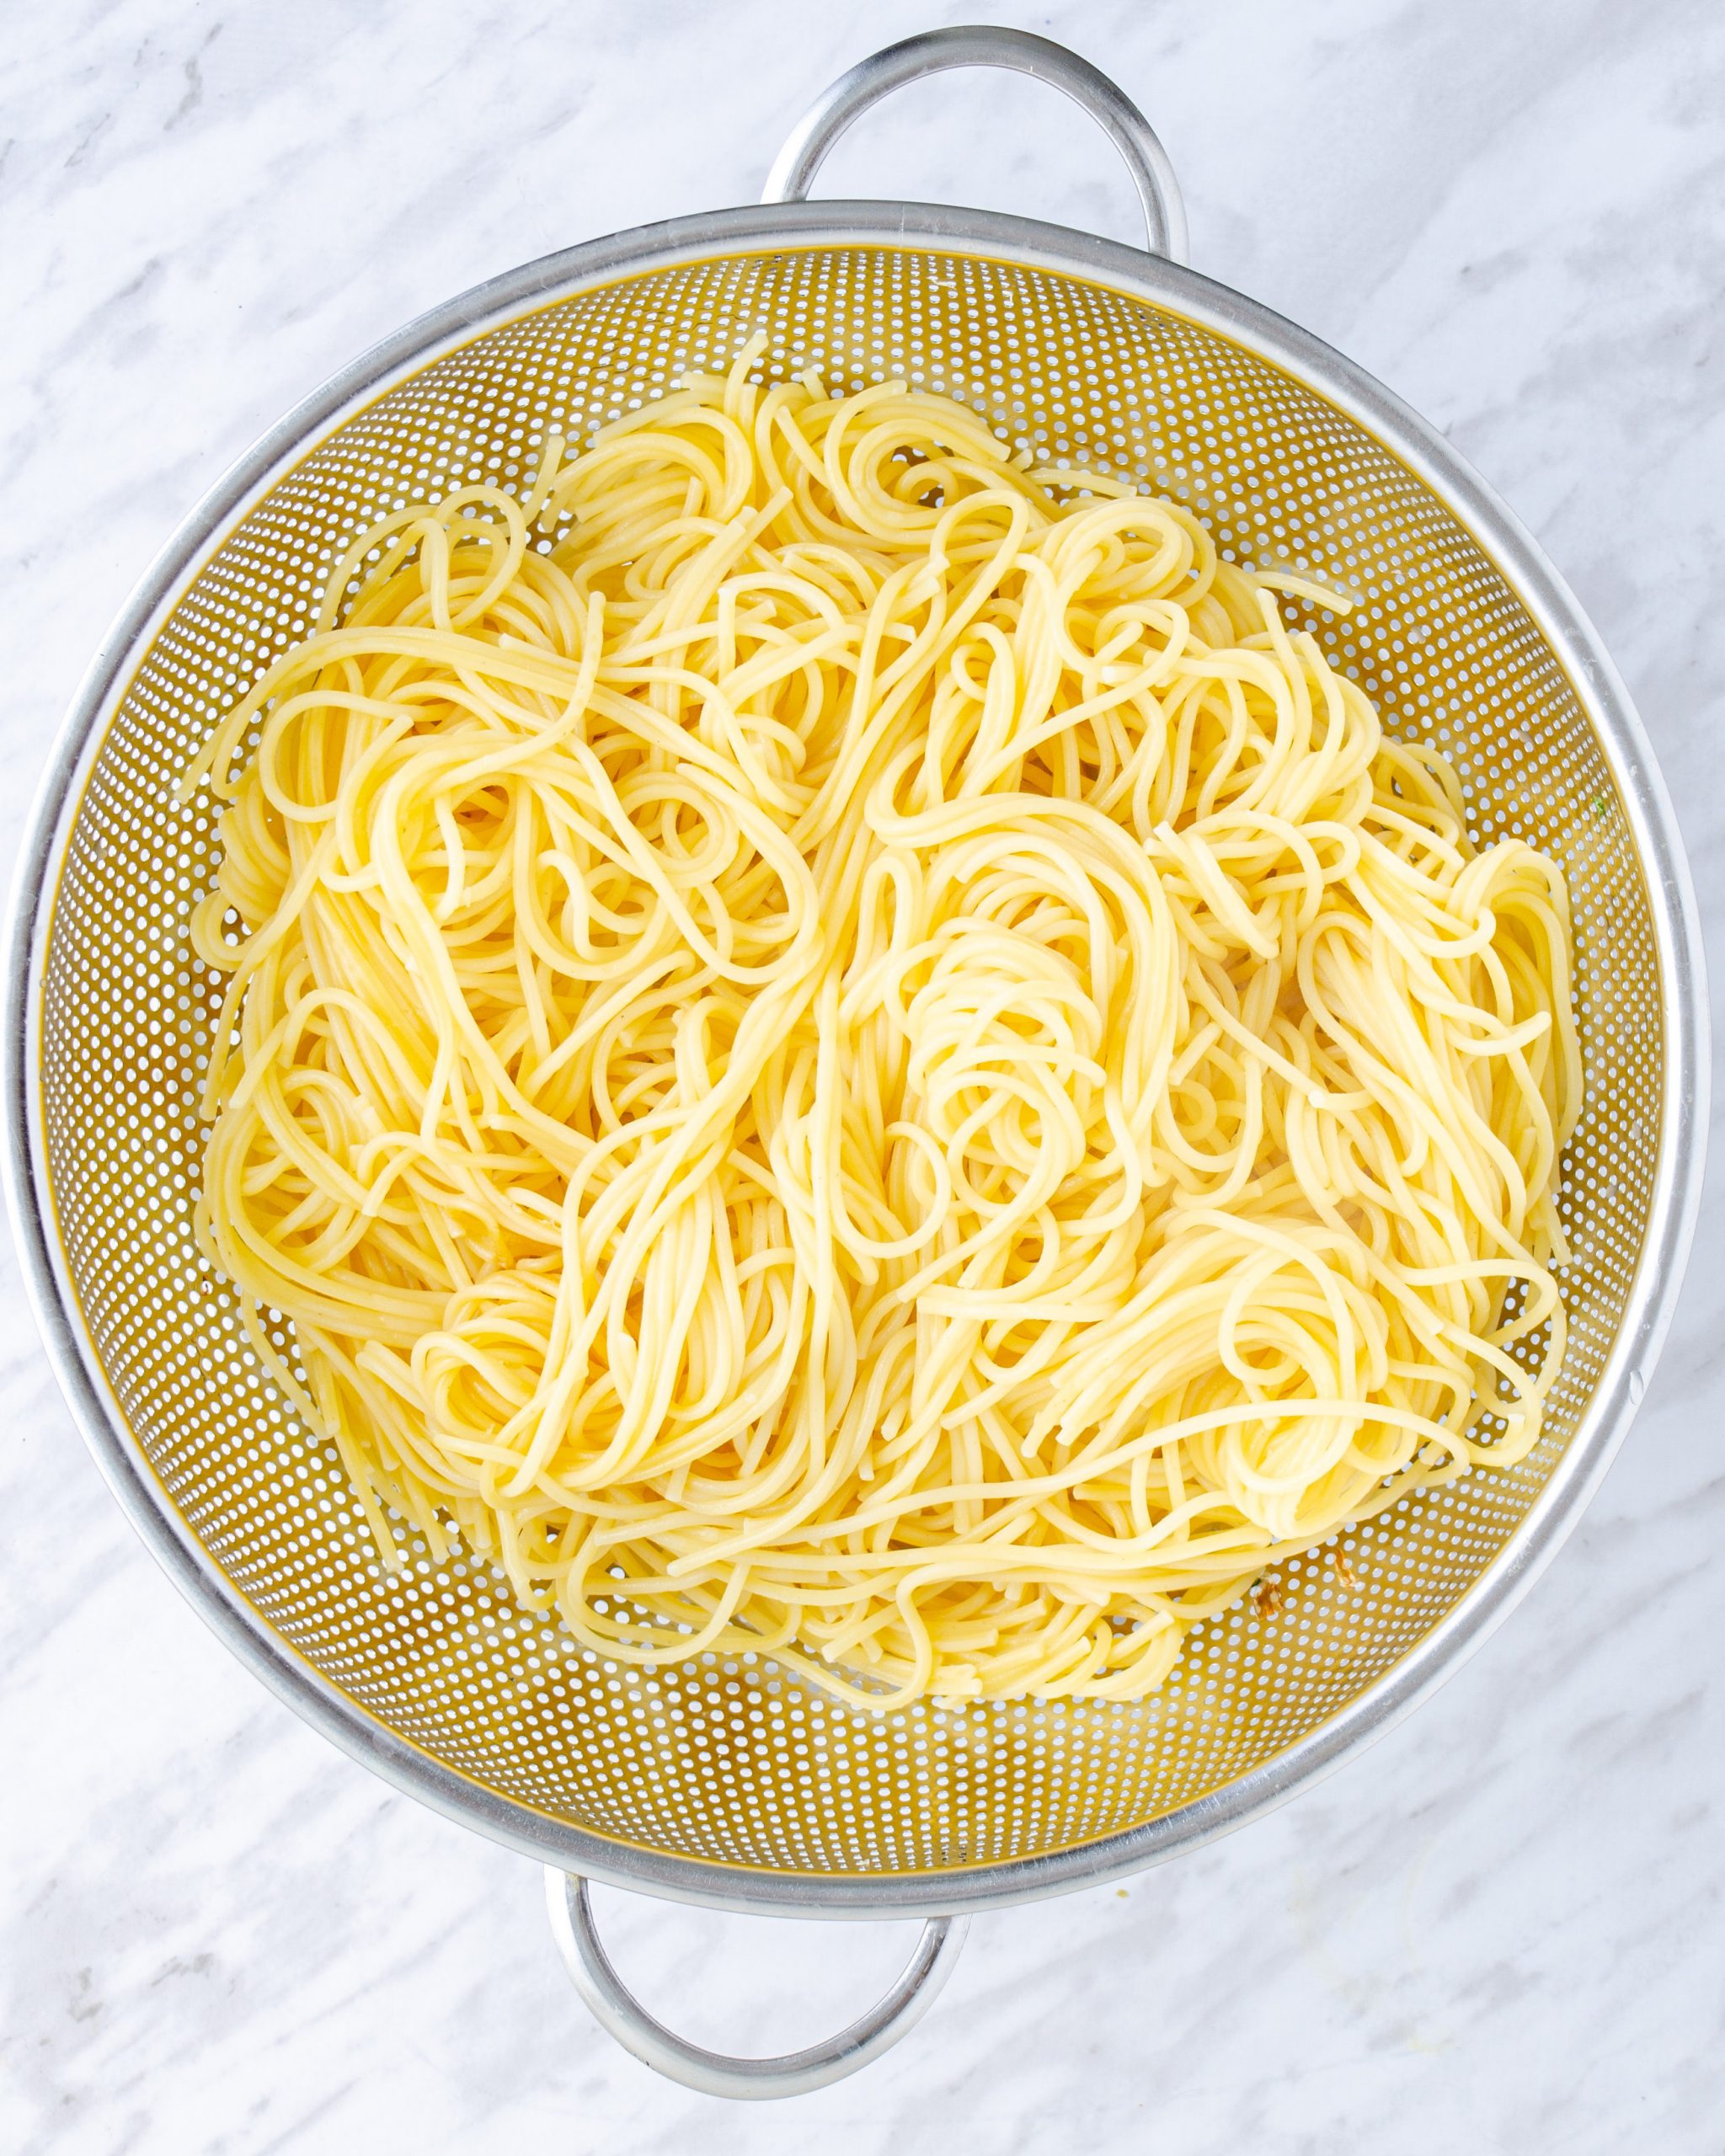 Cook the spaghetti to your liking, rinse under cold water, and drain well.